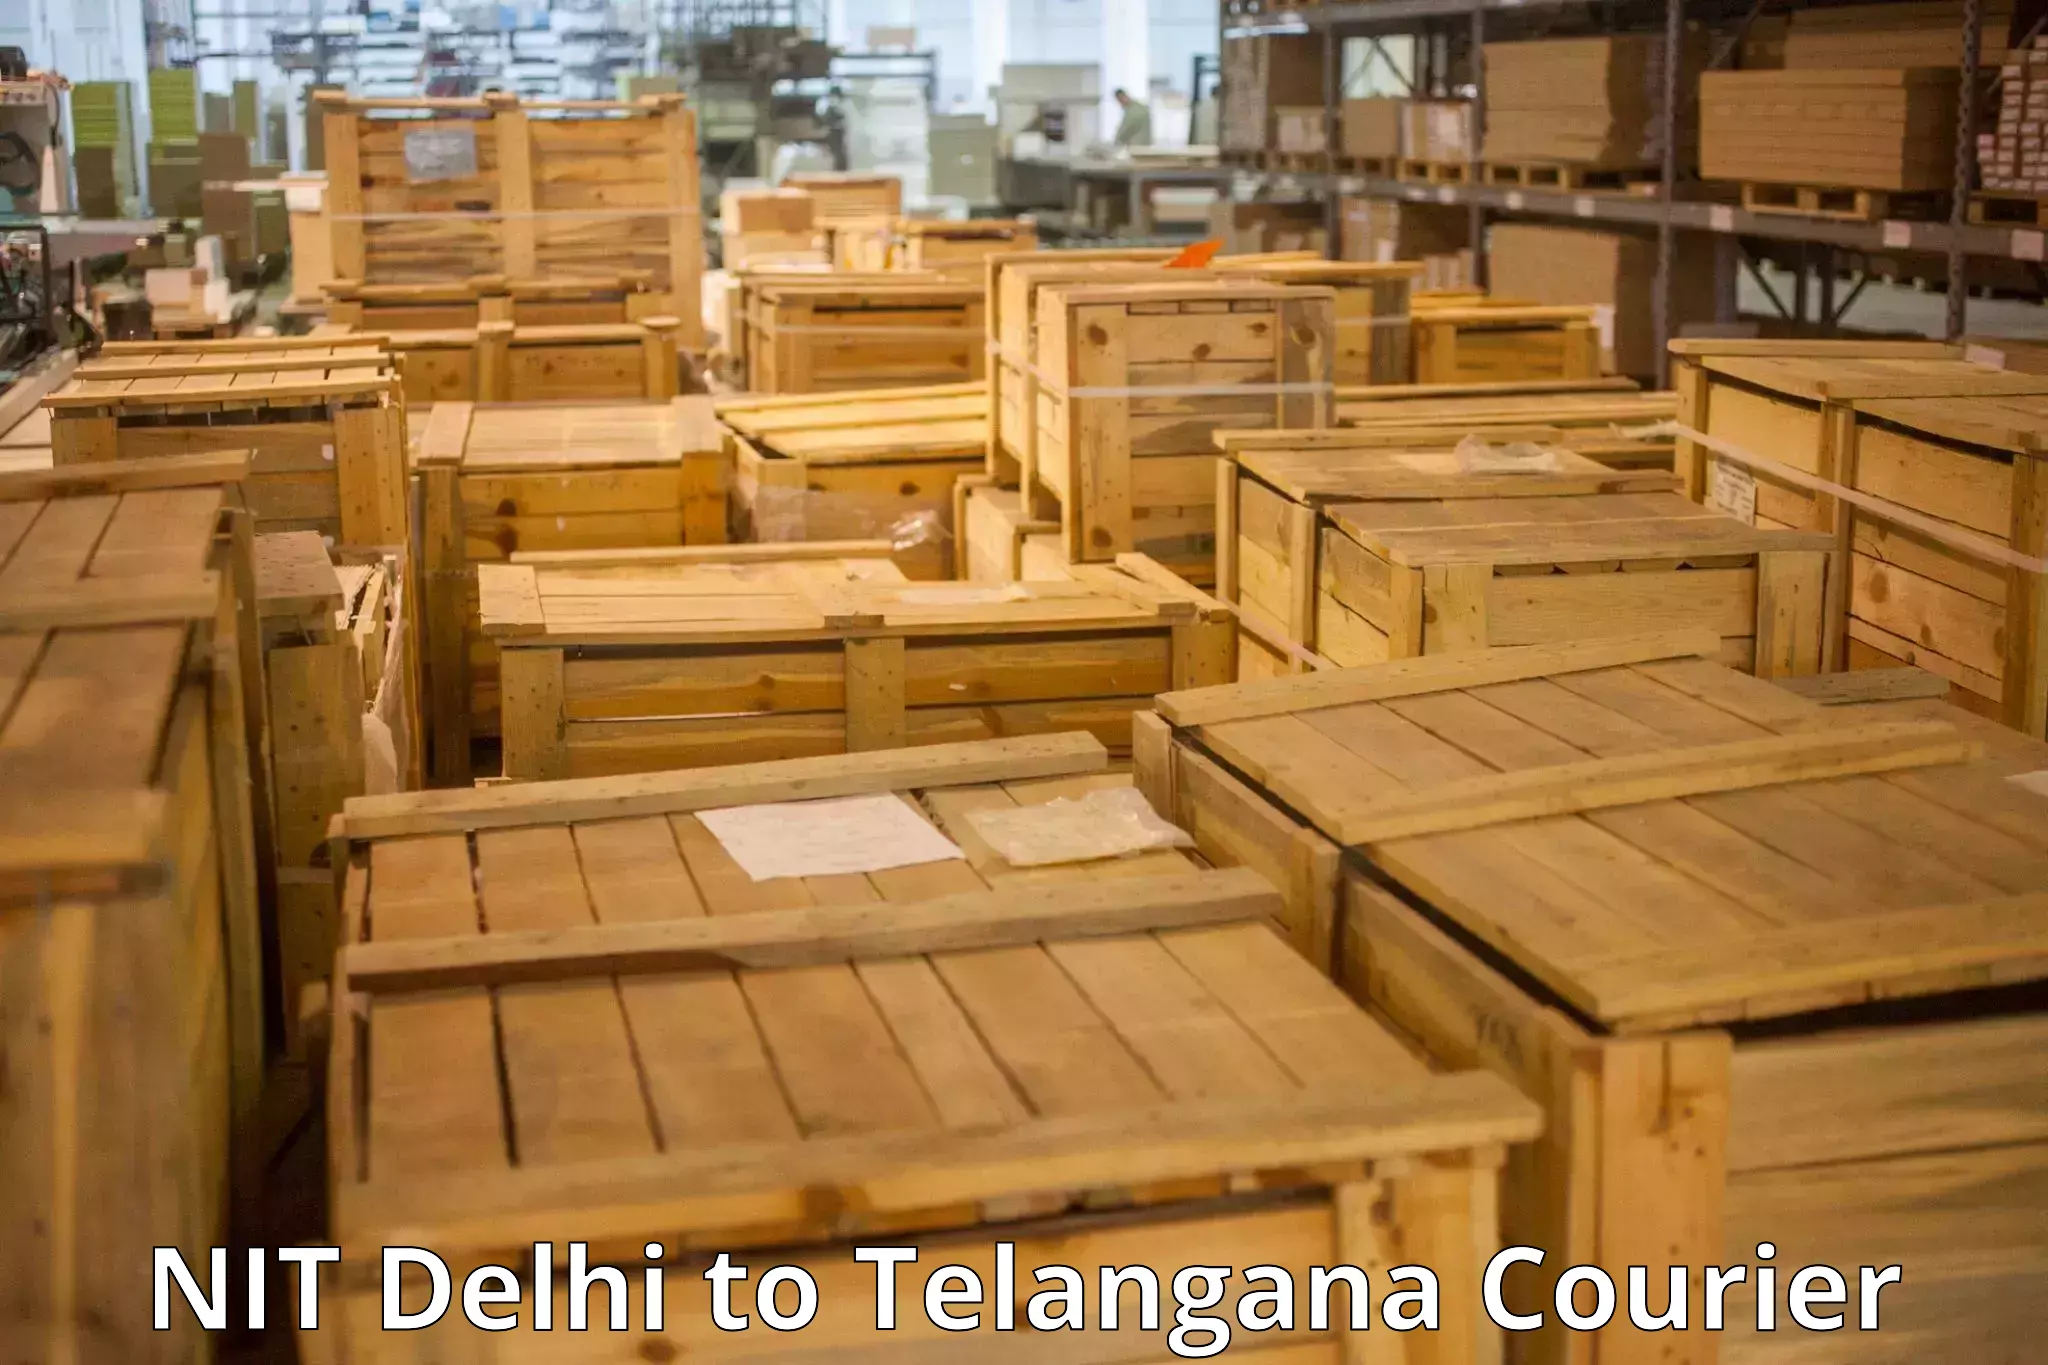 Luggage shipment processing in NIT Delhi to Trimulgherry